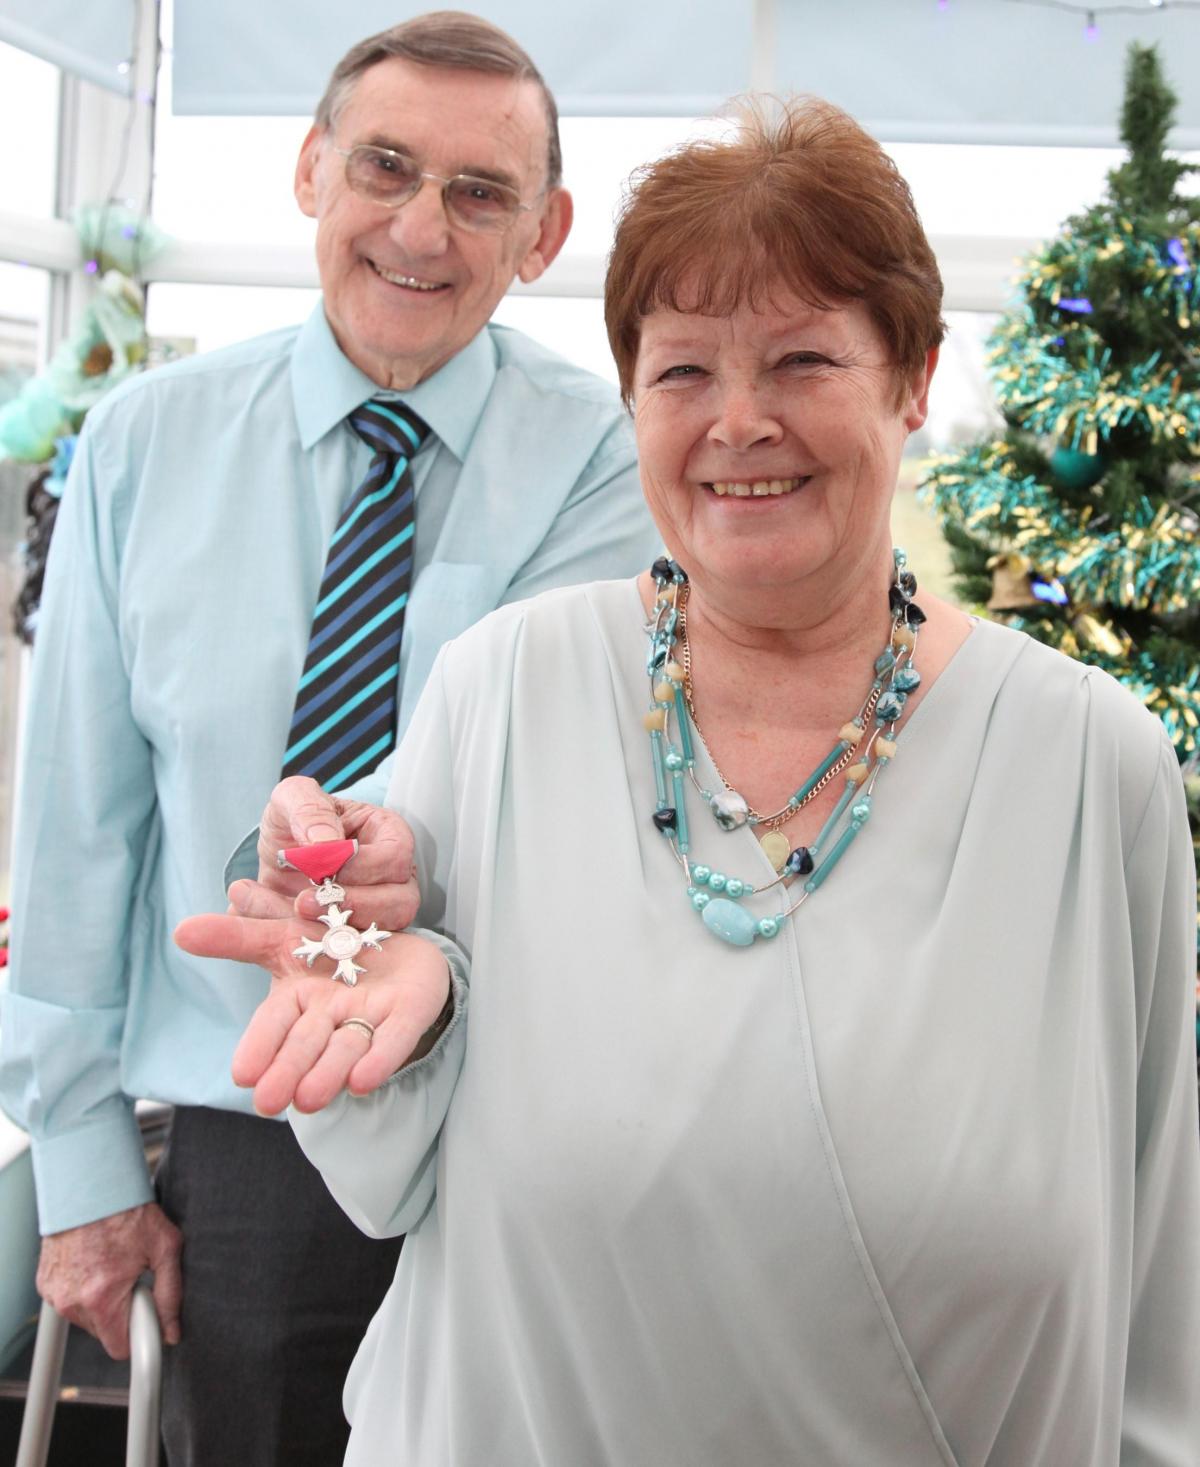 Janet Warin, of Pickering, celebrates receiving an MBE for her work in helping to educate young drivers. She is pictured with her husband, David.
Picture: Jo Hughes